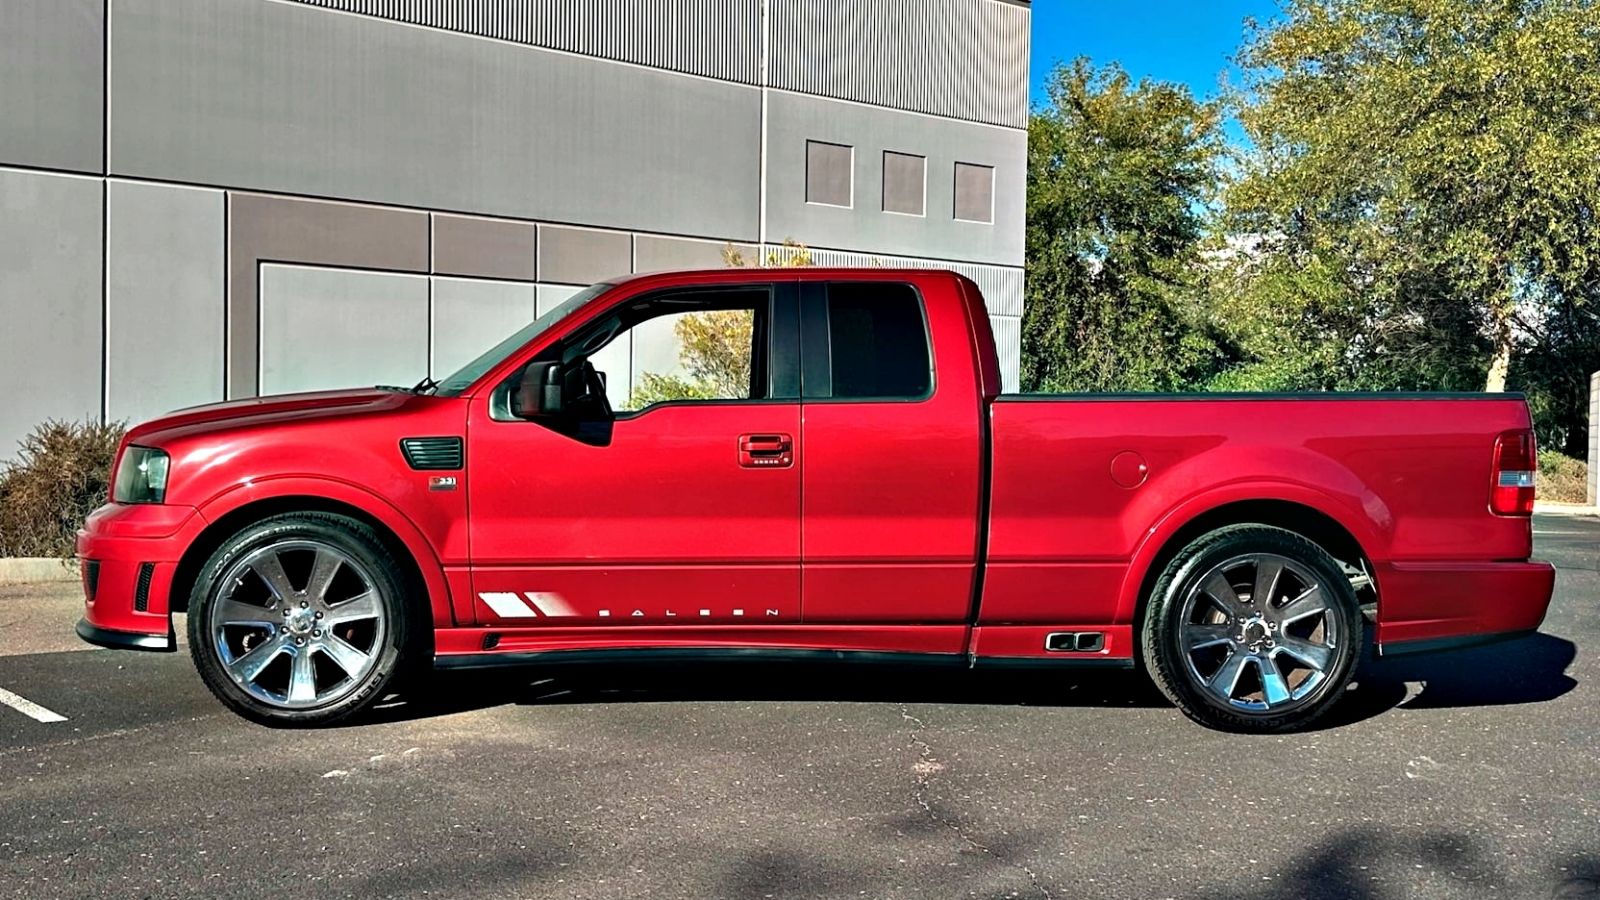 Red 2007 Ford F-150 Saleen Pickup